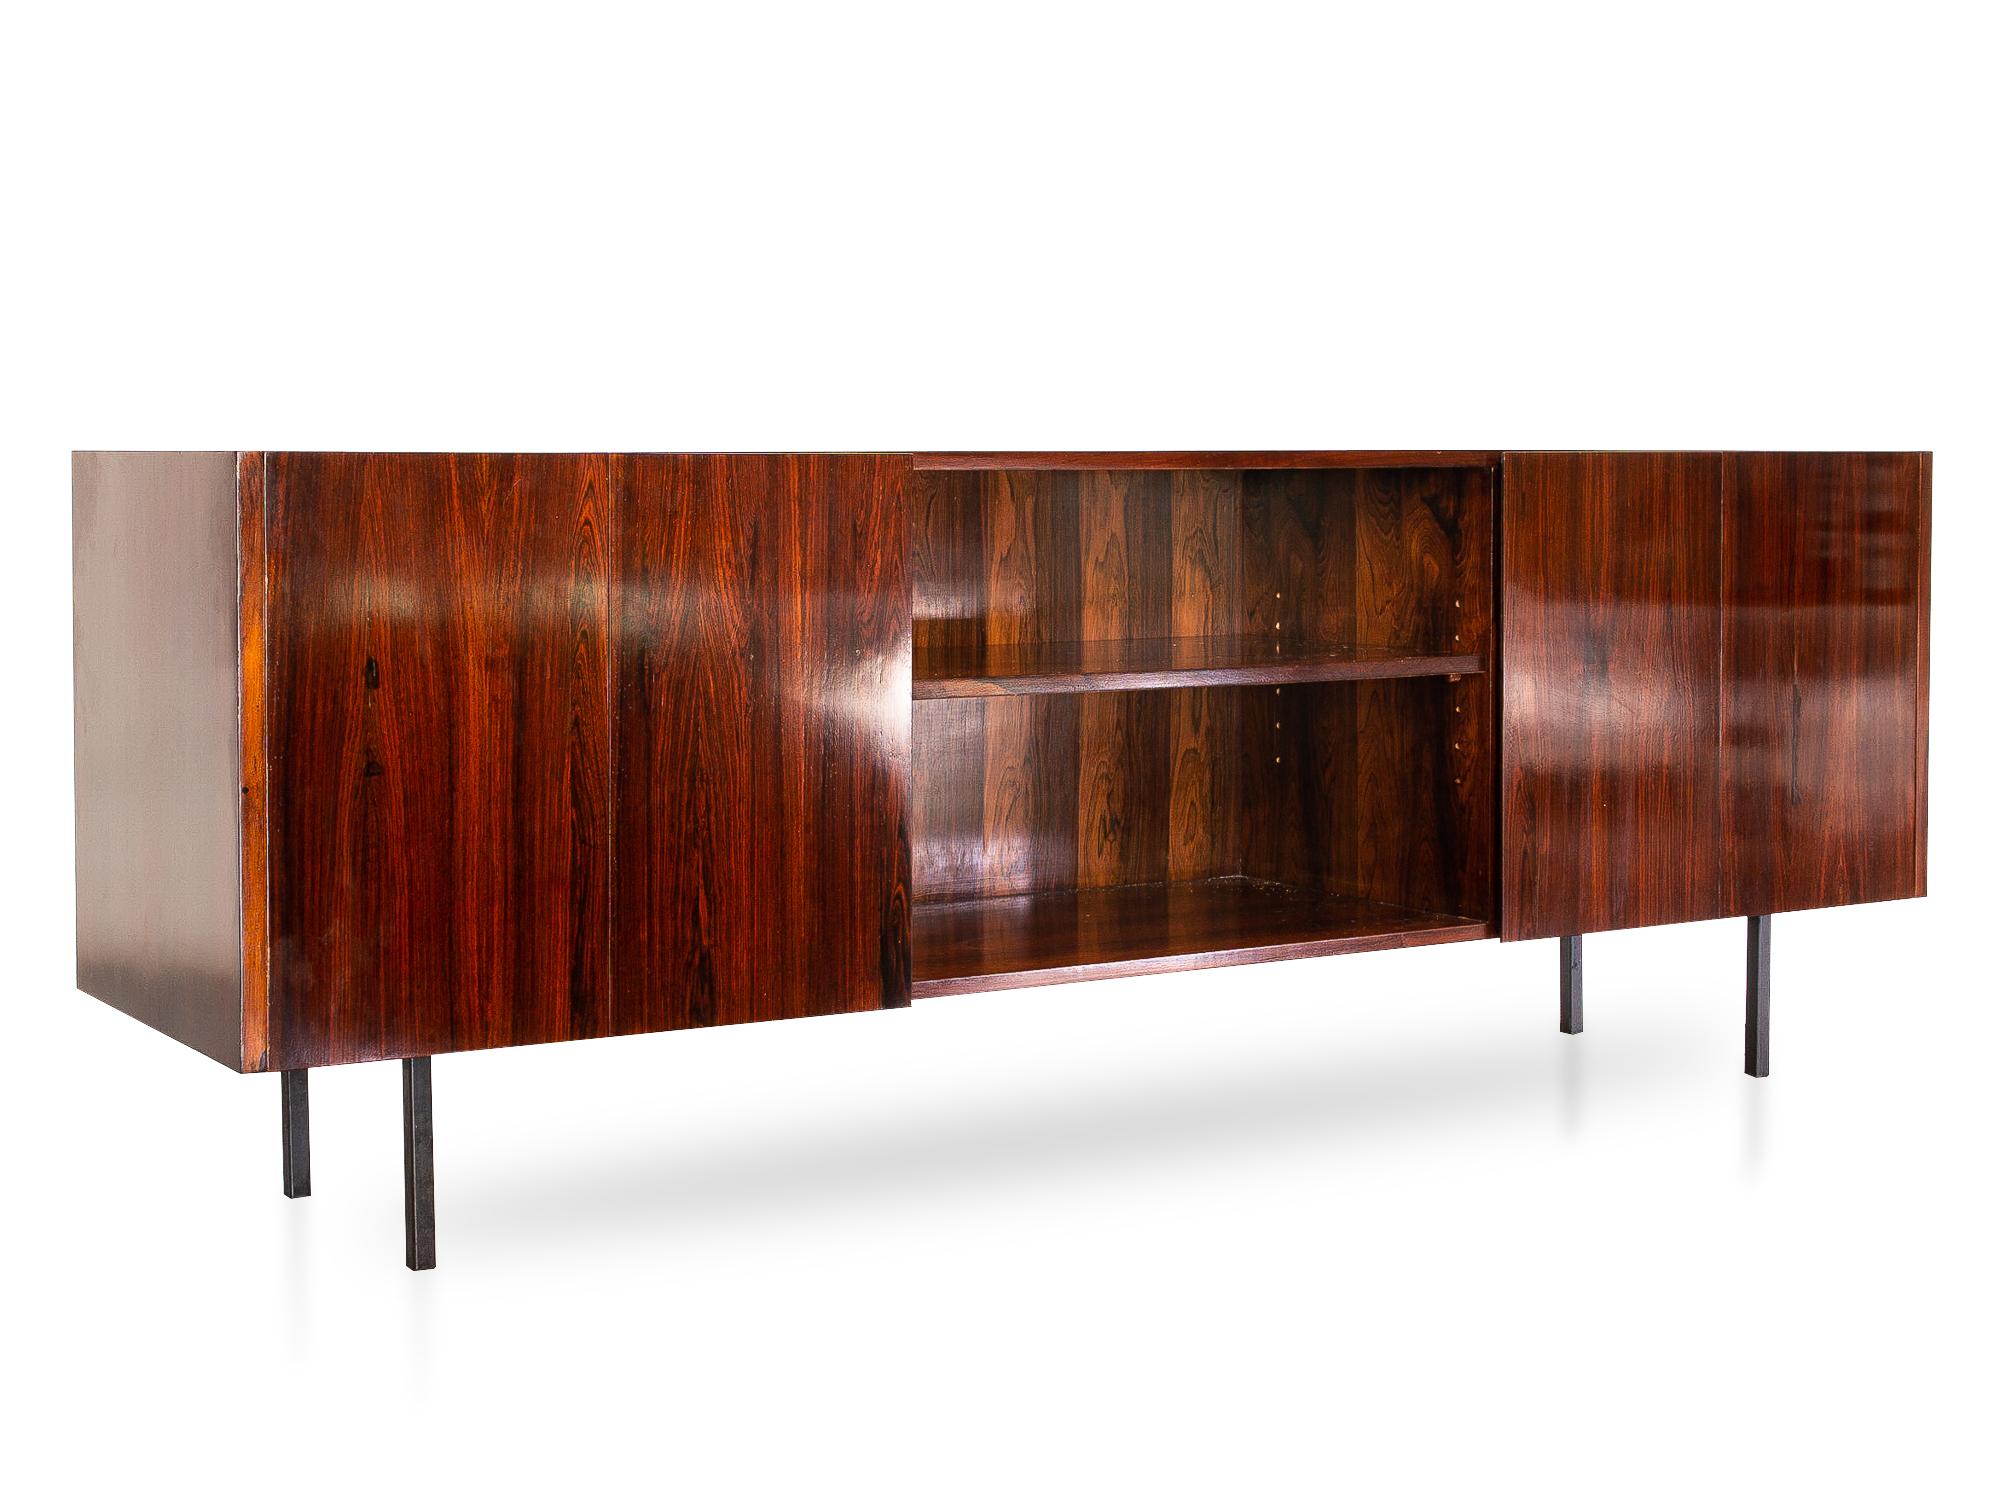 Produced by Móveis Ambiente, and designed by Carlo Fongaro, this beautiful Minimalist credenza or sideboard is sure to fit in any room!

The doors are hinged in the middle, making them open without taking much space. The interiors are lined in